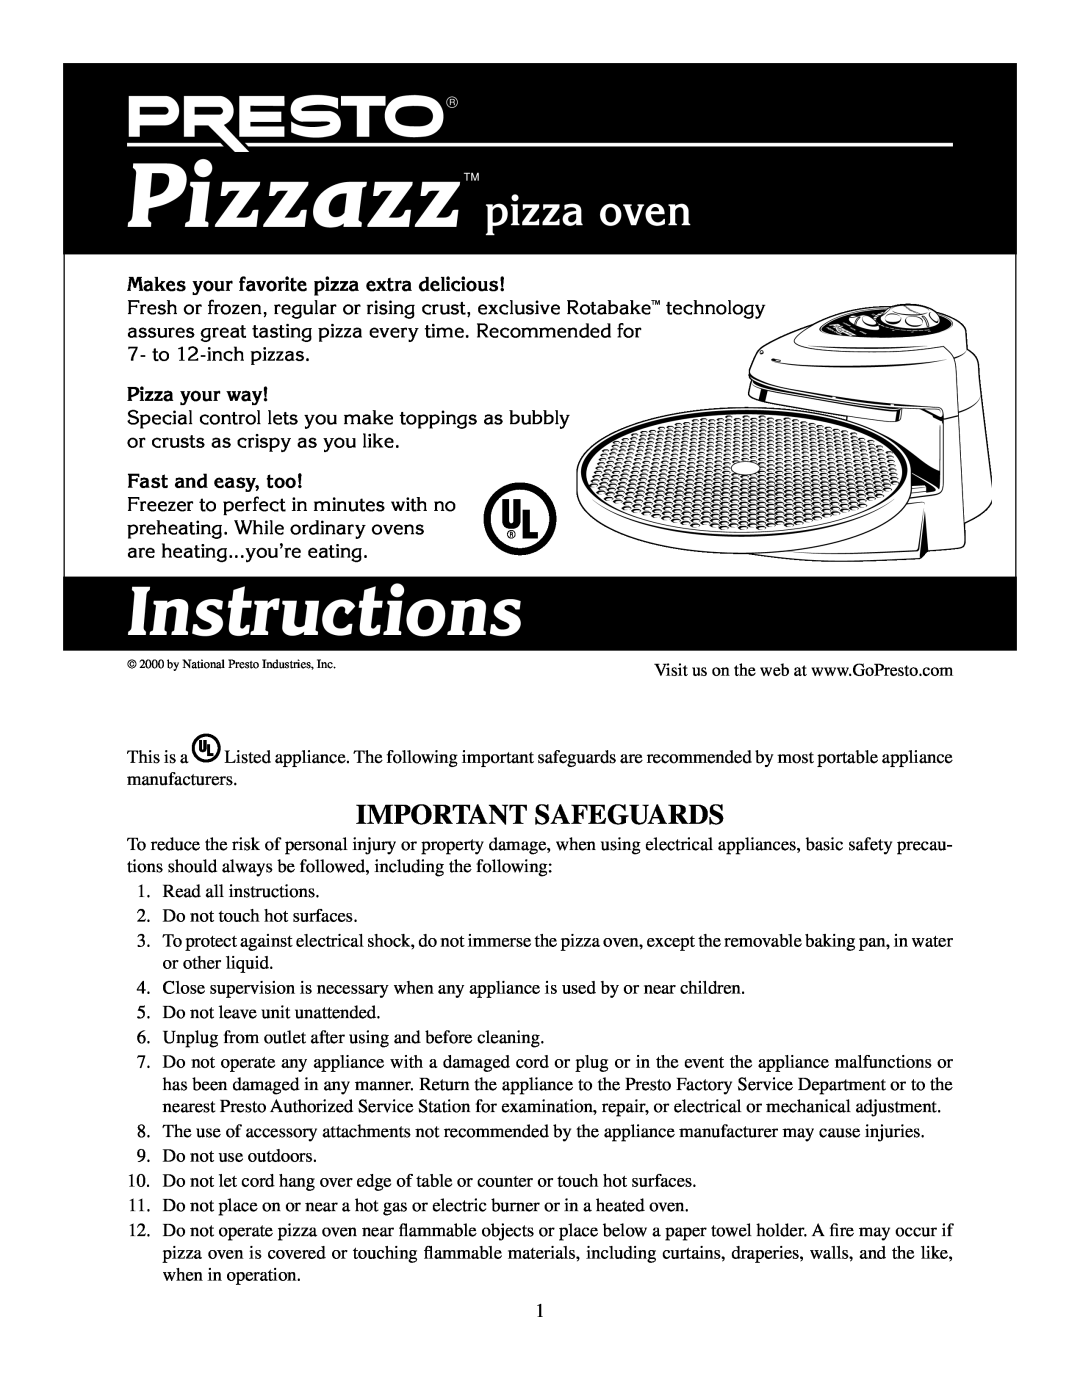 Presto Pizzazz Oven manual Important Safeguards, Makes your favorite pizza extra delicious, Pizza your way, Instructions 